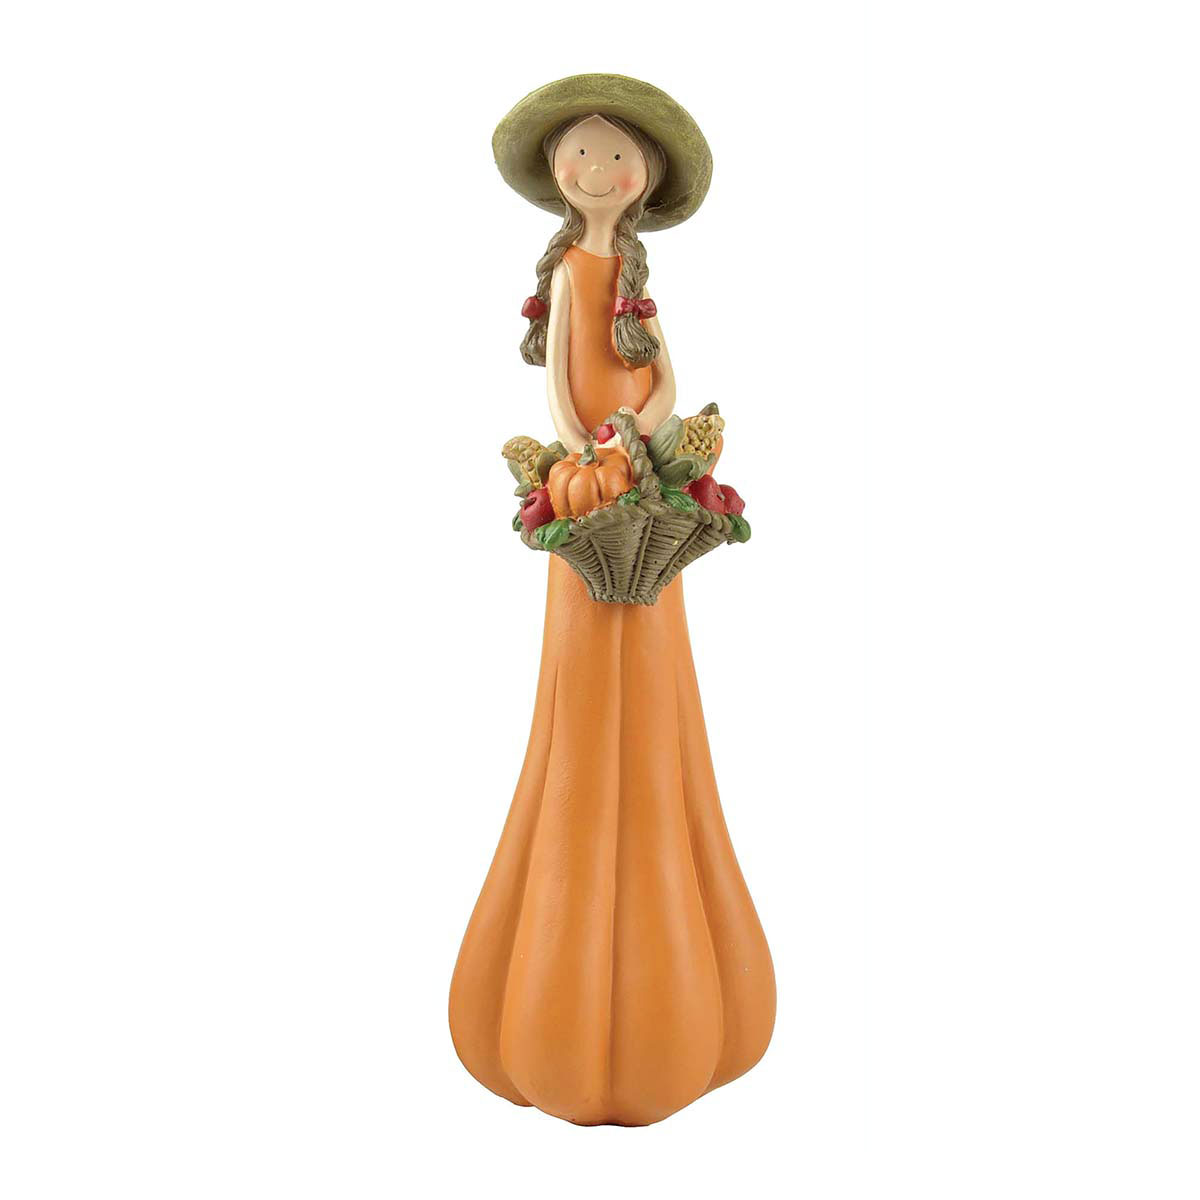 Ennas funny collection vintage figurines at discount-1